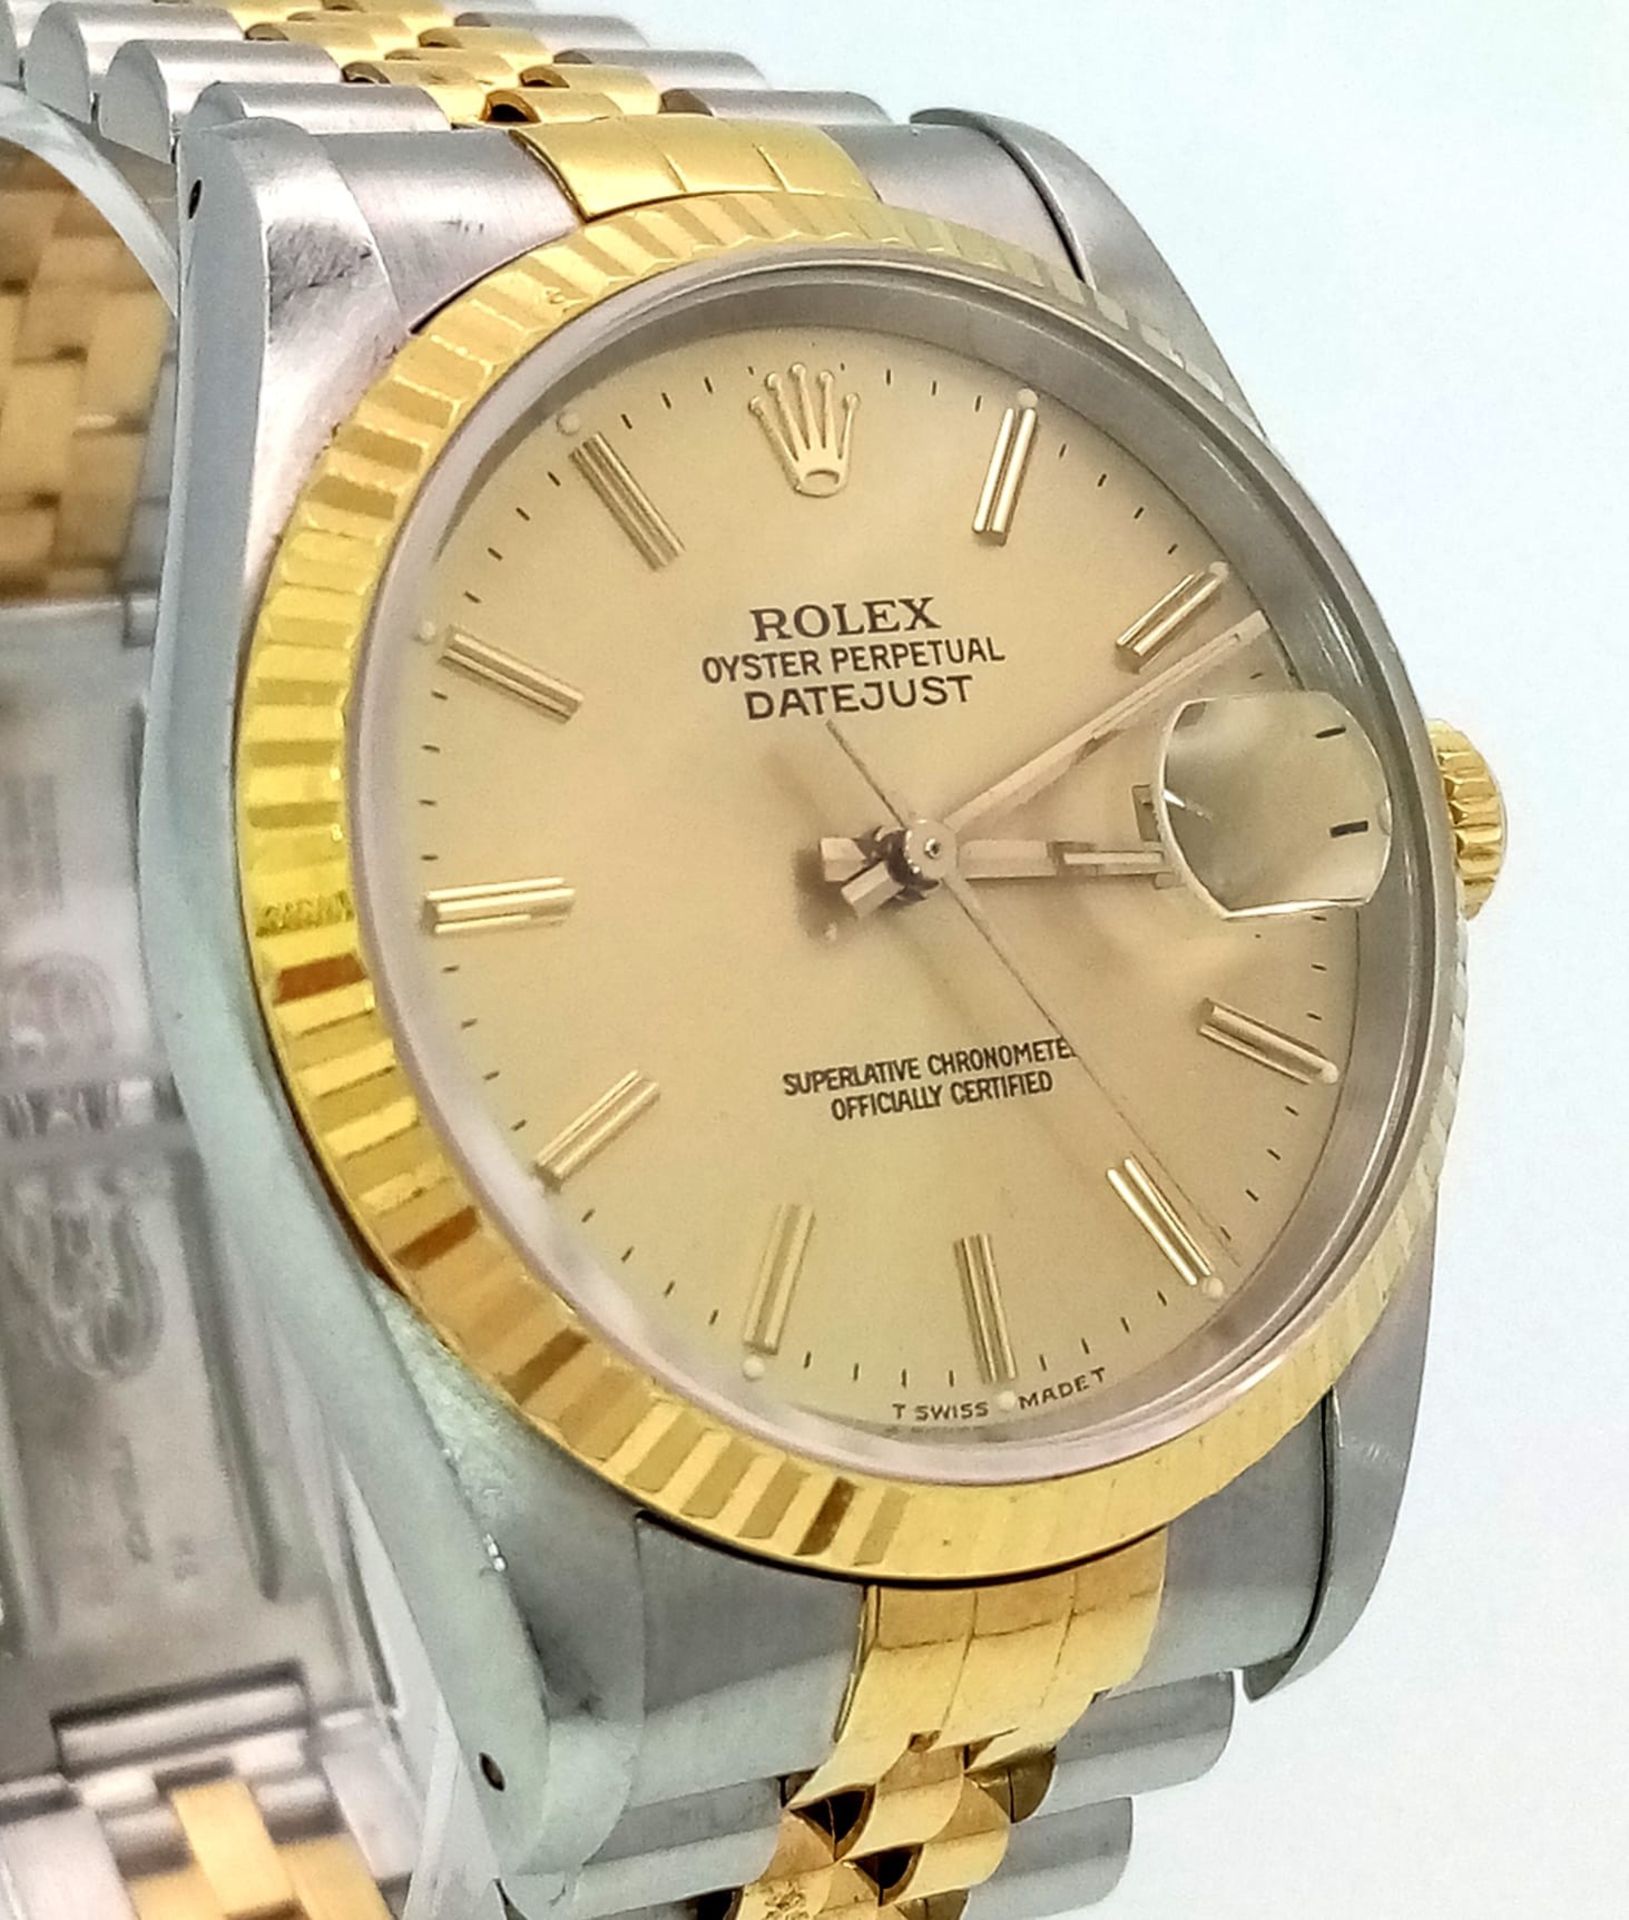 A Rolex Oyster Perpetual Datejust Gents Watch. Bi-metal strap and case - 36mm. Gold tone dial. - Image 2 of 5